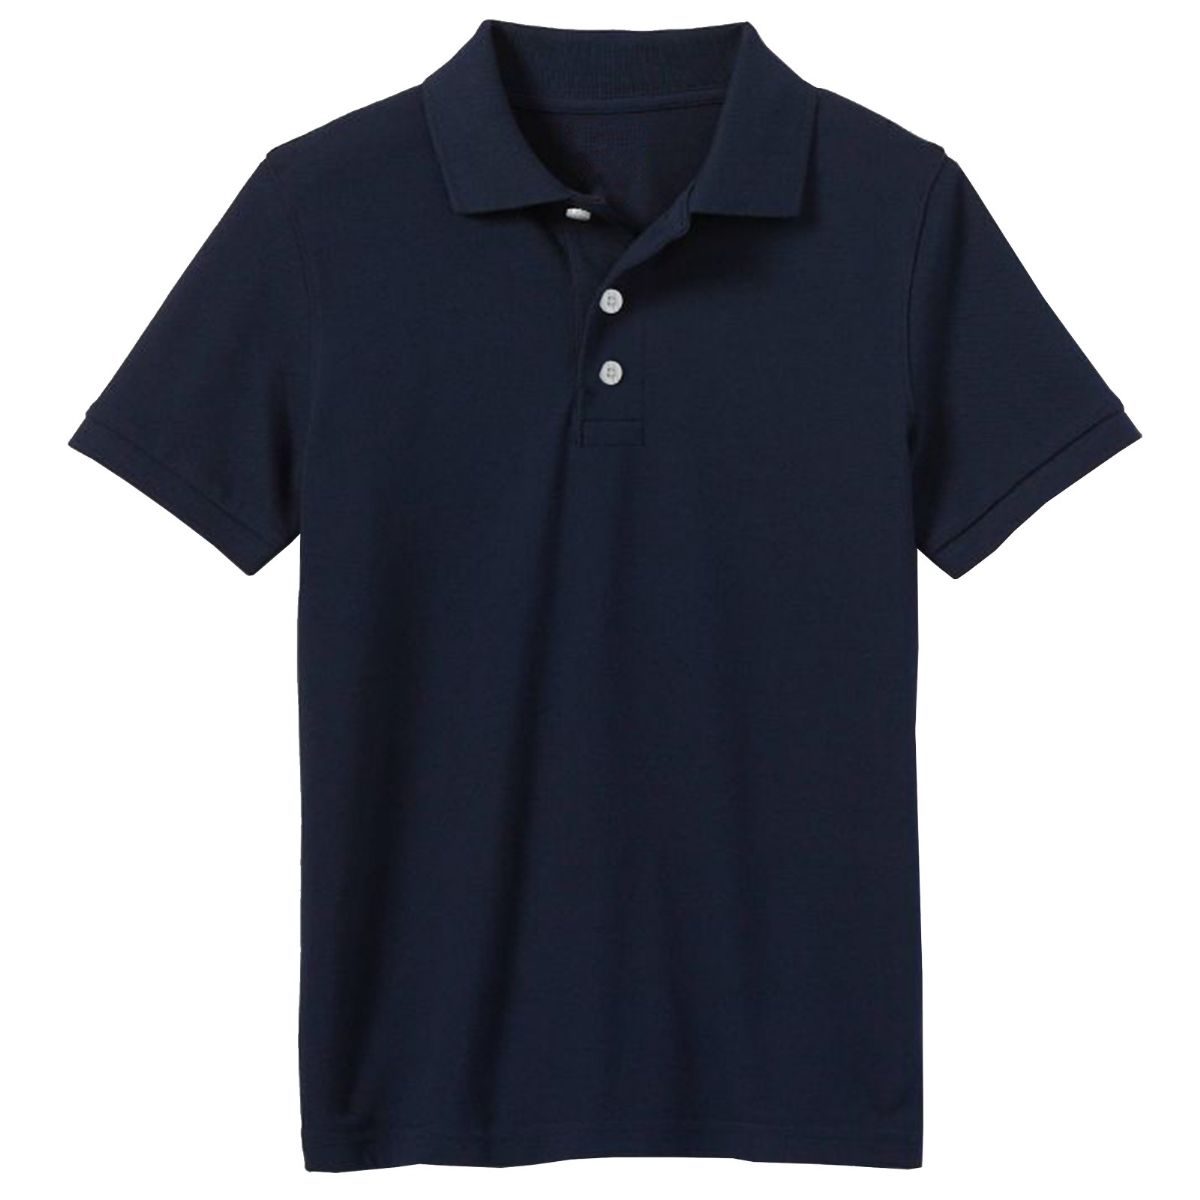 24 Pieces of Youth Polo Shirt Navy In Size M